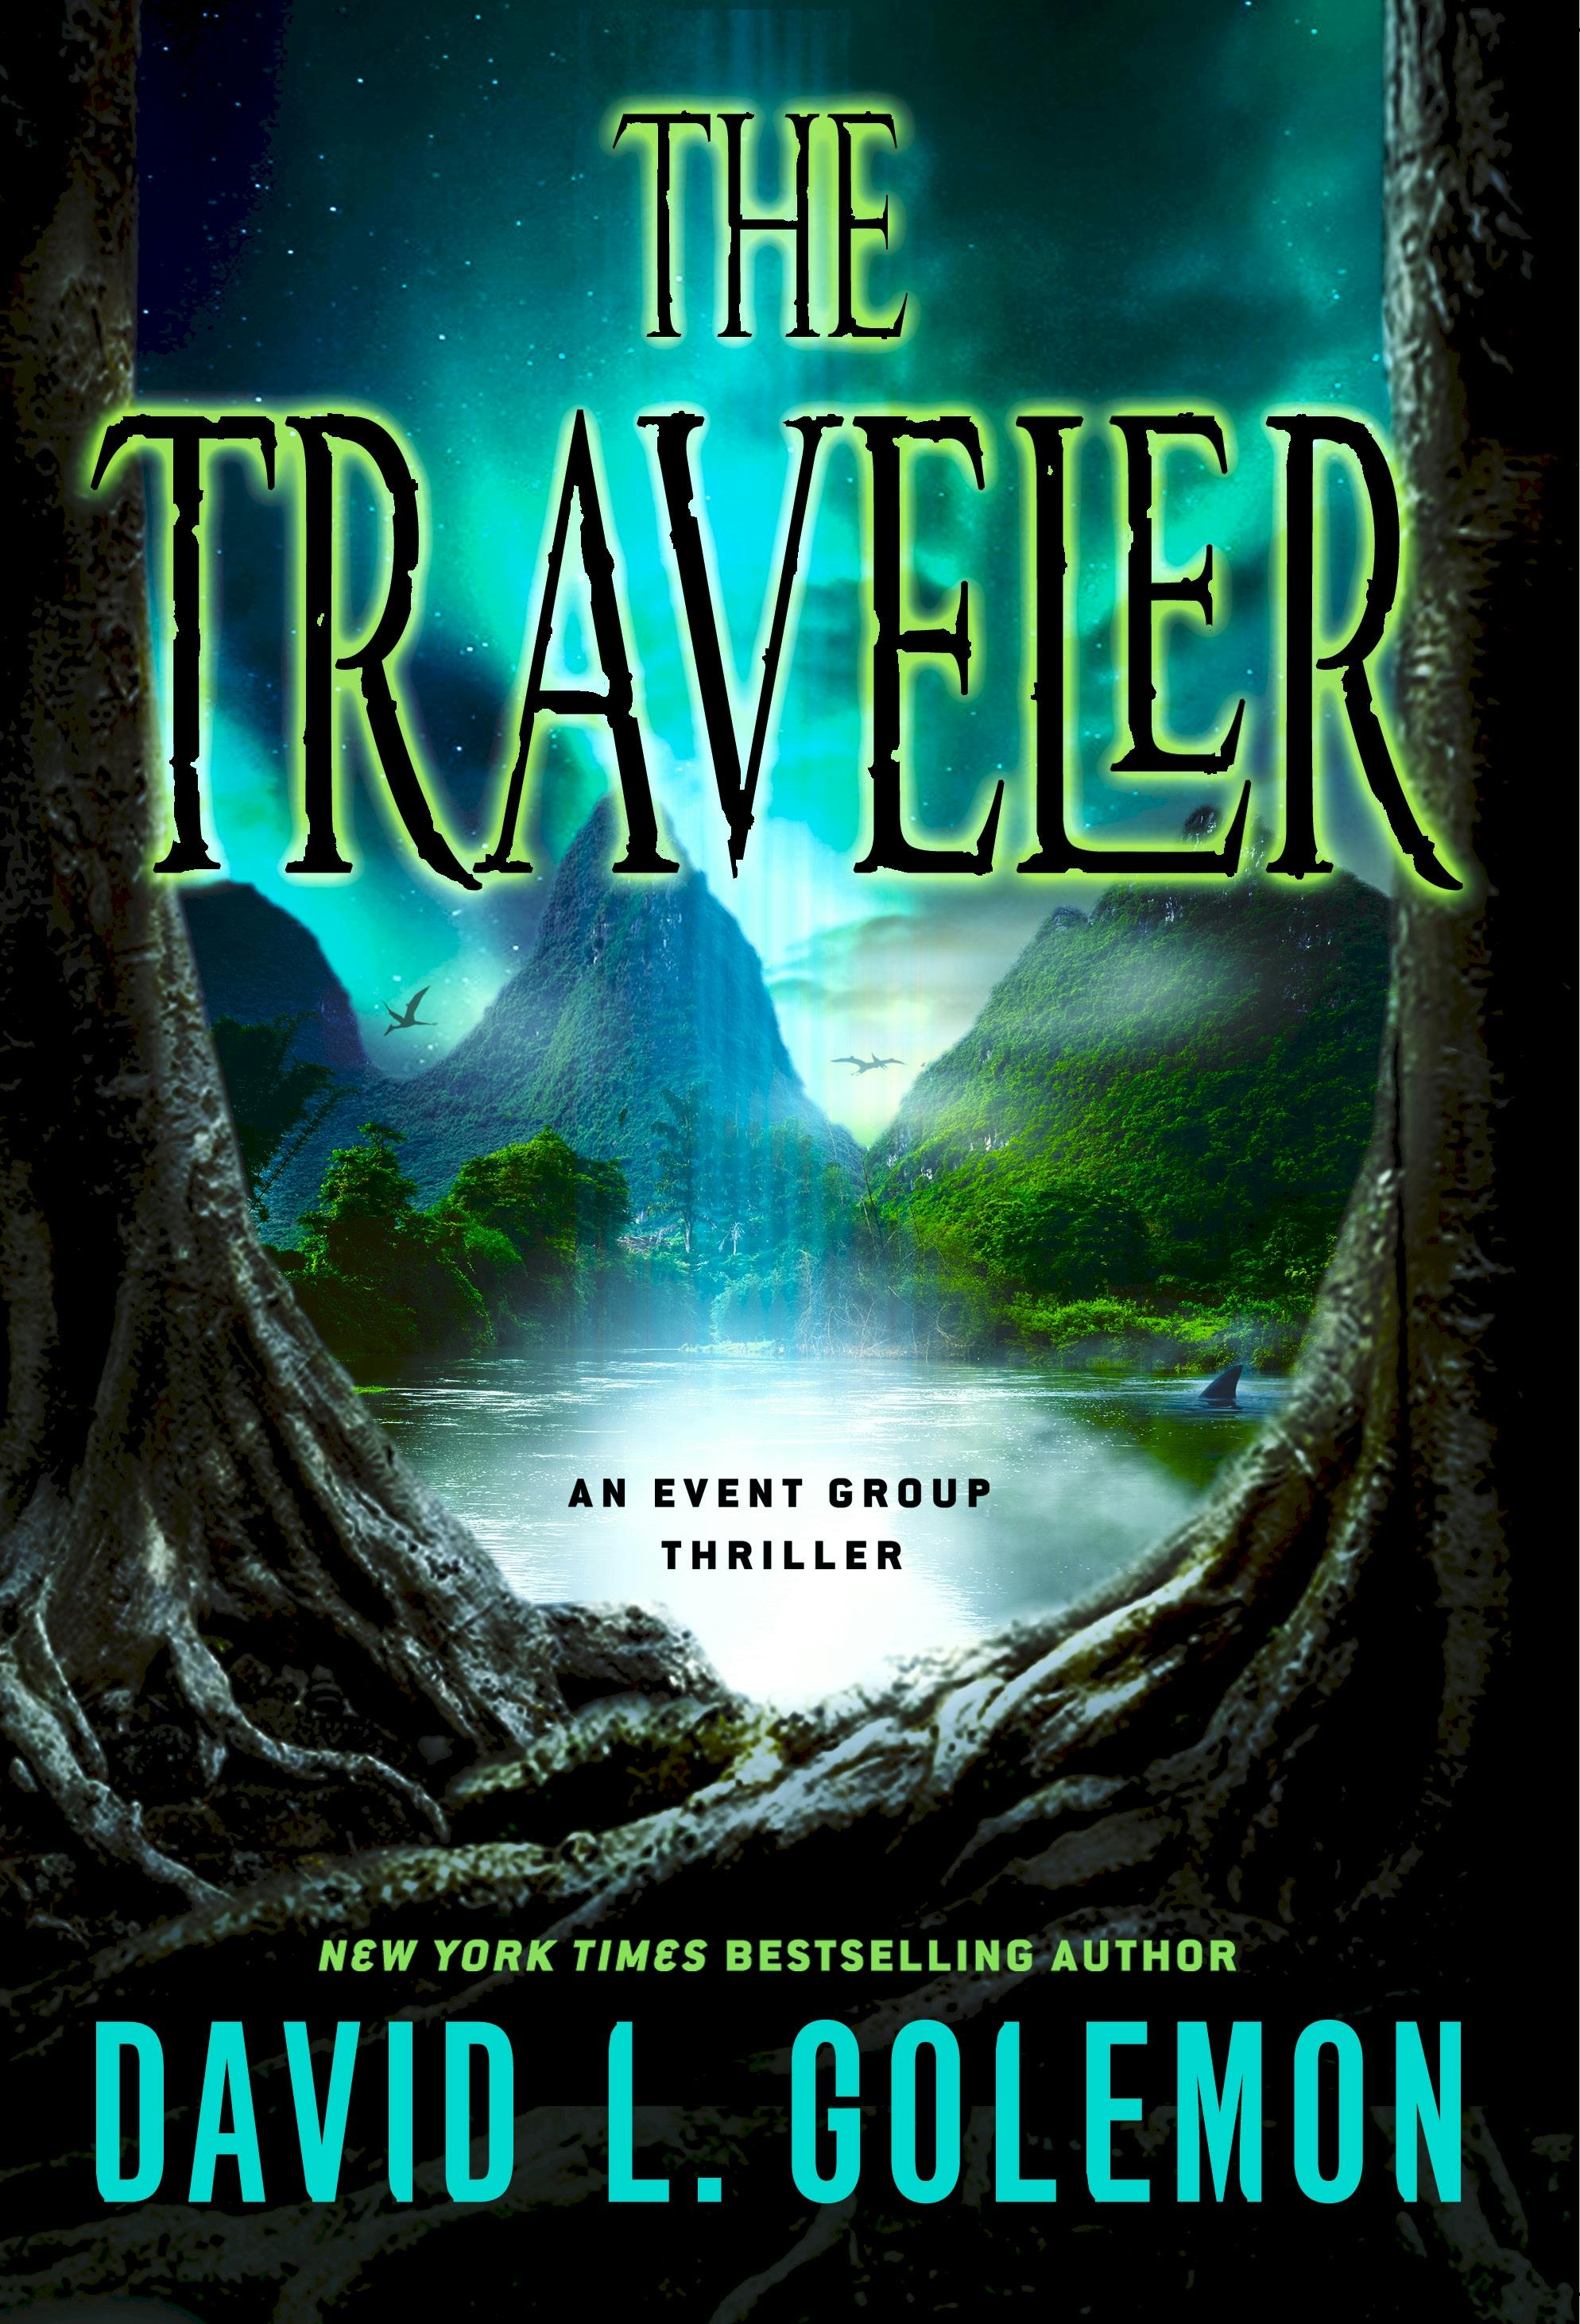 Image of The Traveler